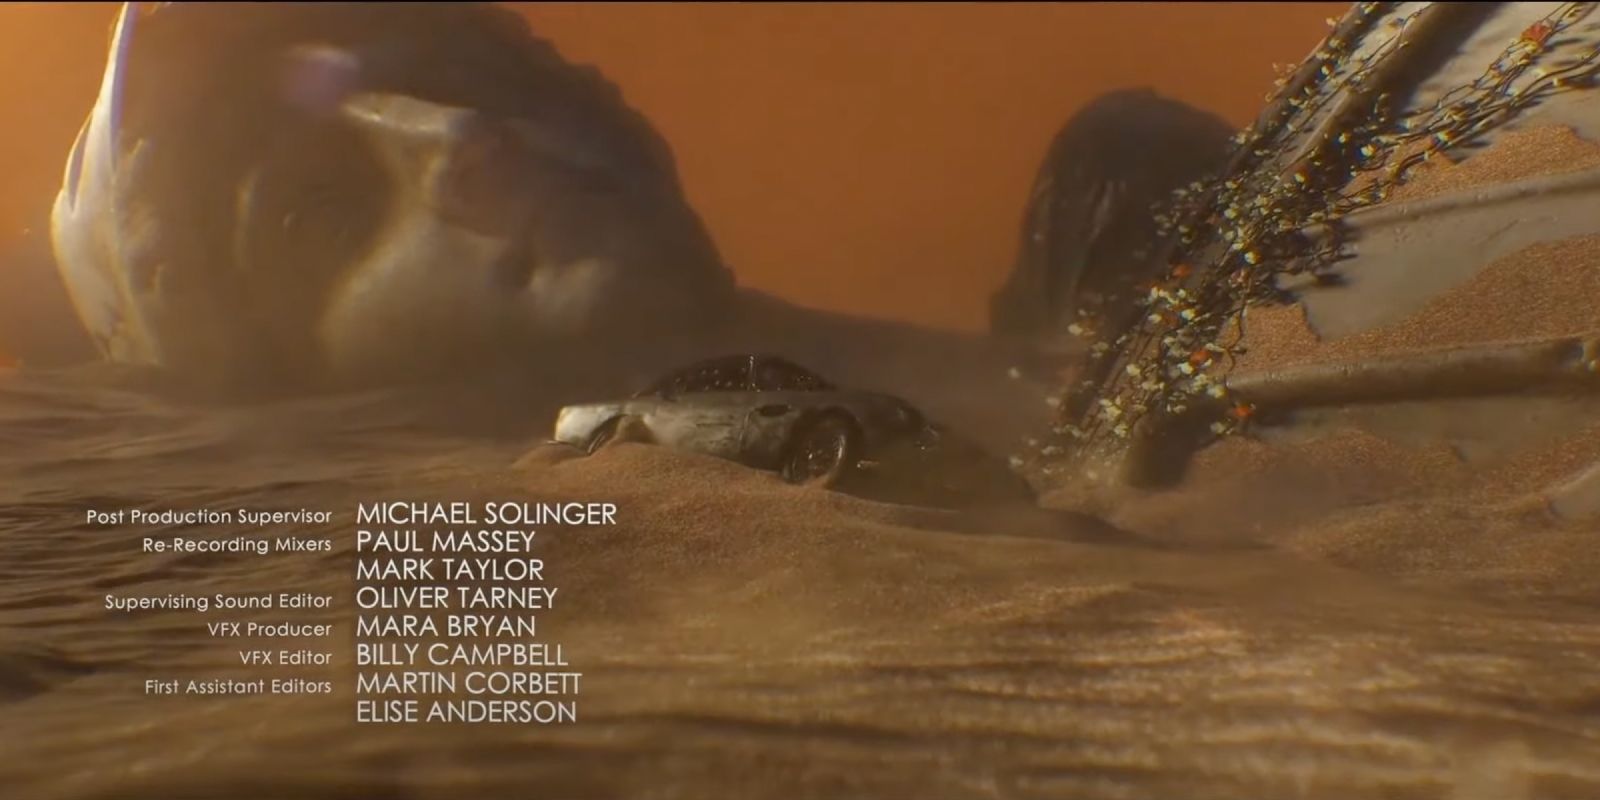 A car lies in the sand before a fallen statue during the opening credits sequence in 'No Time to Die'.